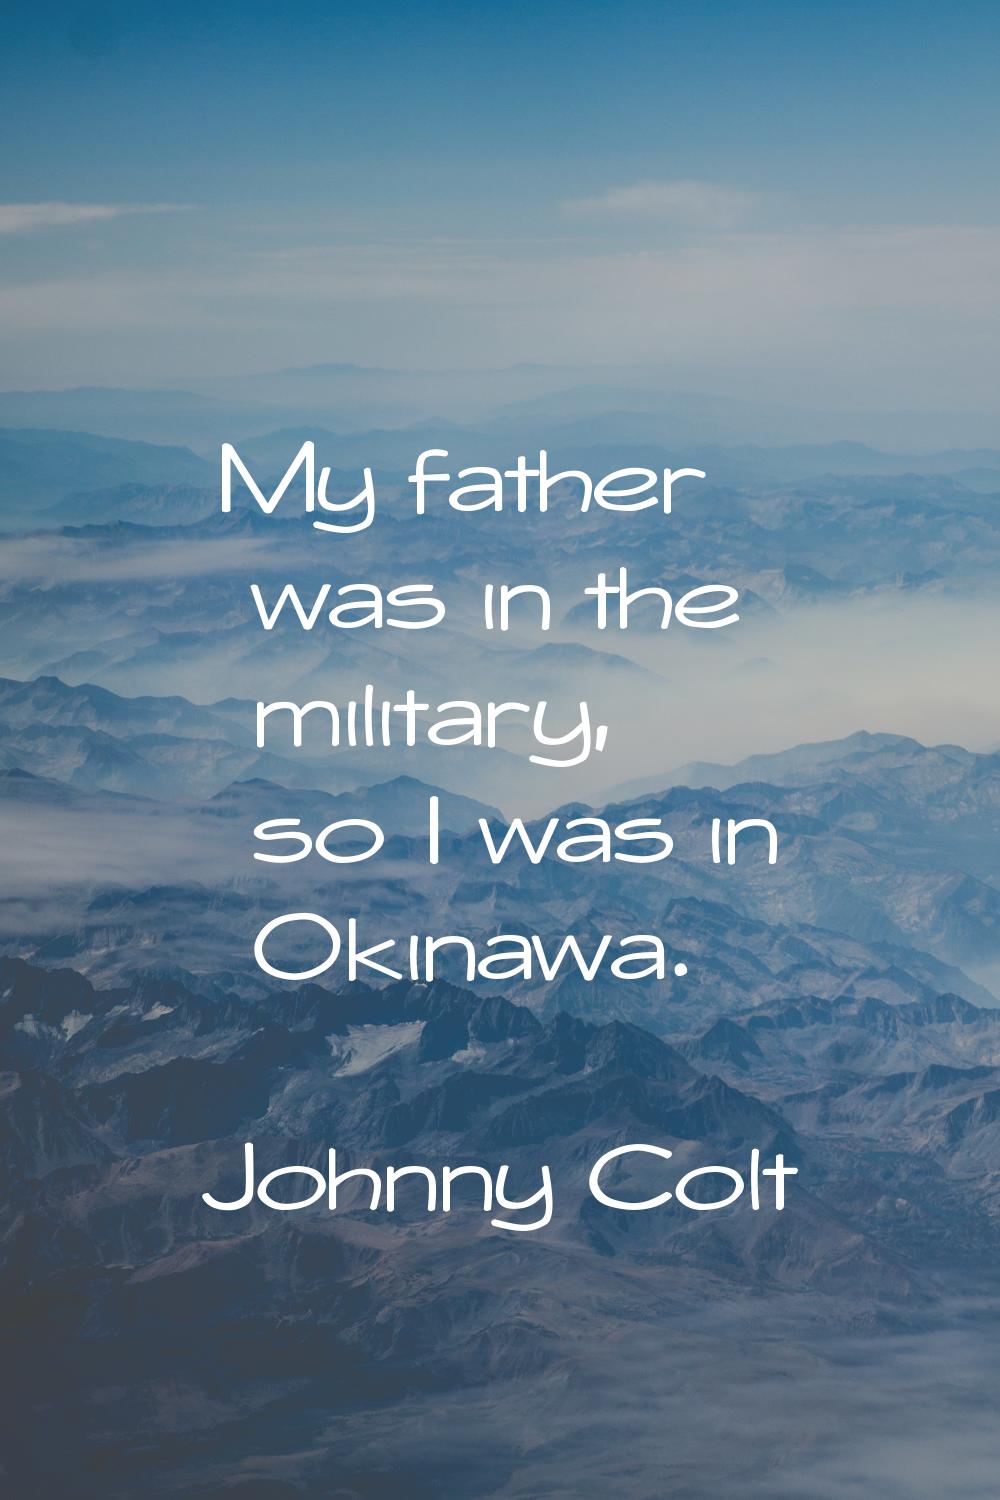 My father was in the military, so I was in Okinawa.